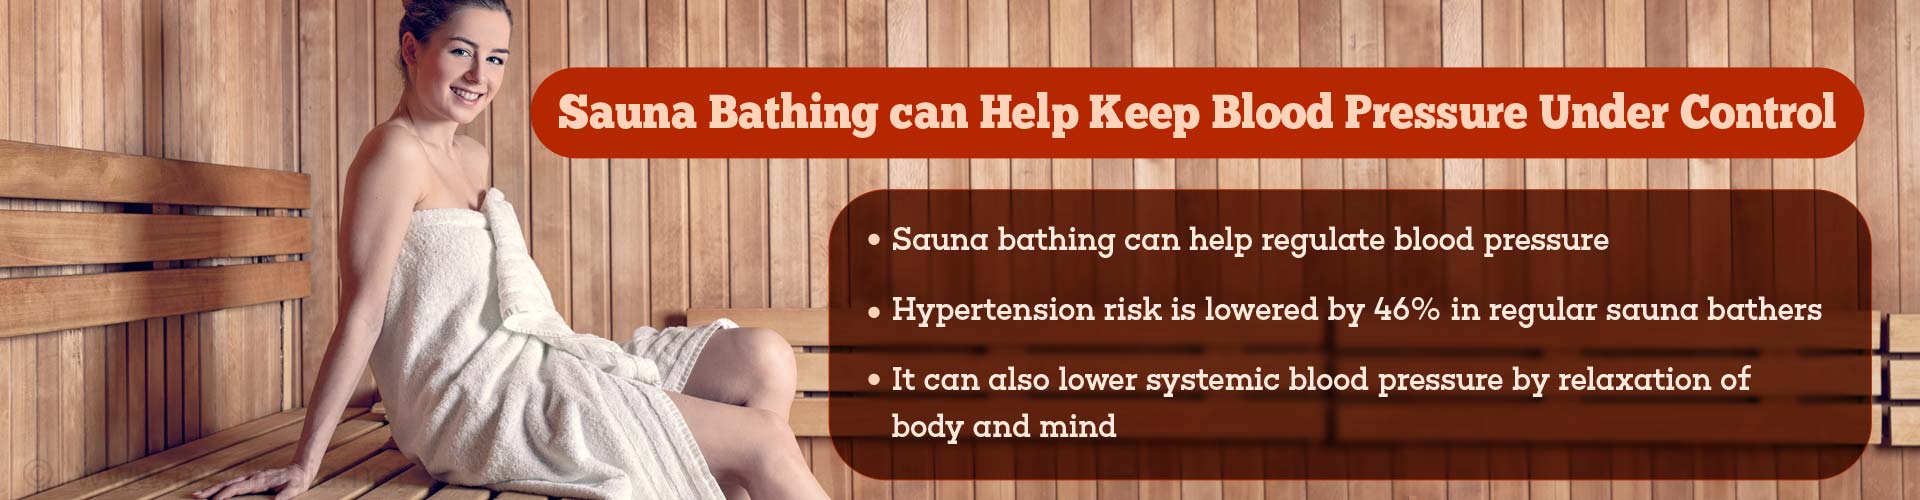 Sauna bathing can help keep blood pressure under control
- Sauna bathing can help regulate blood pressure
- Hypertension risk is lowered by 46% in regular sauna bathers
- It can also lower systemic blood pressure by relaxation of body and mind